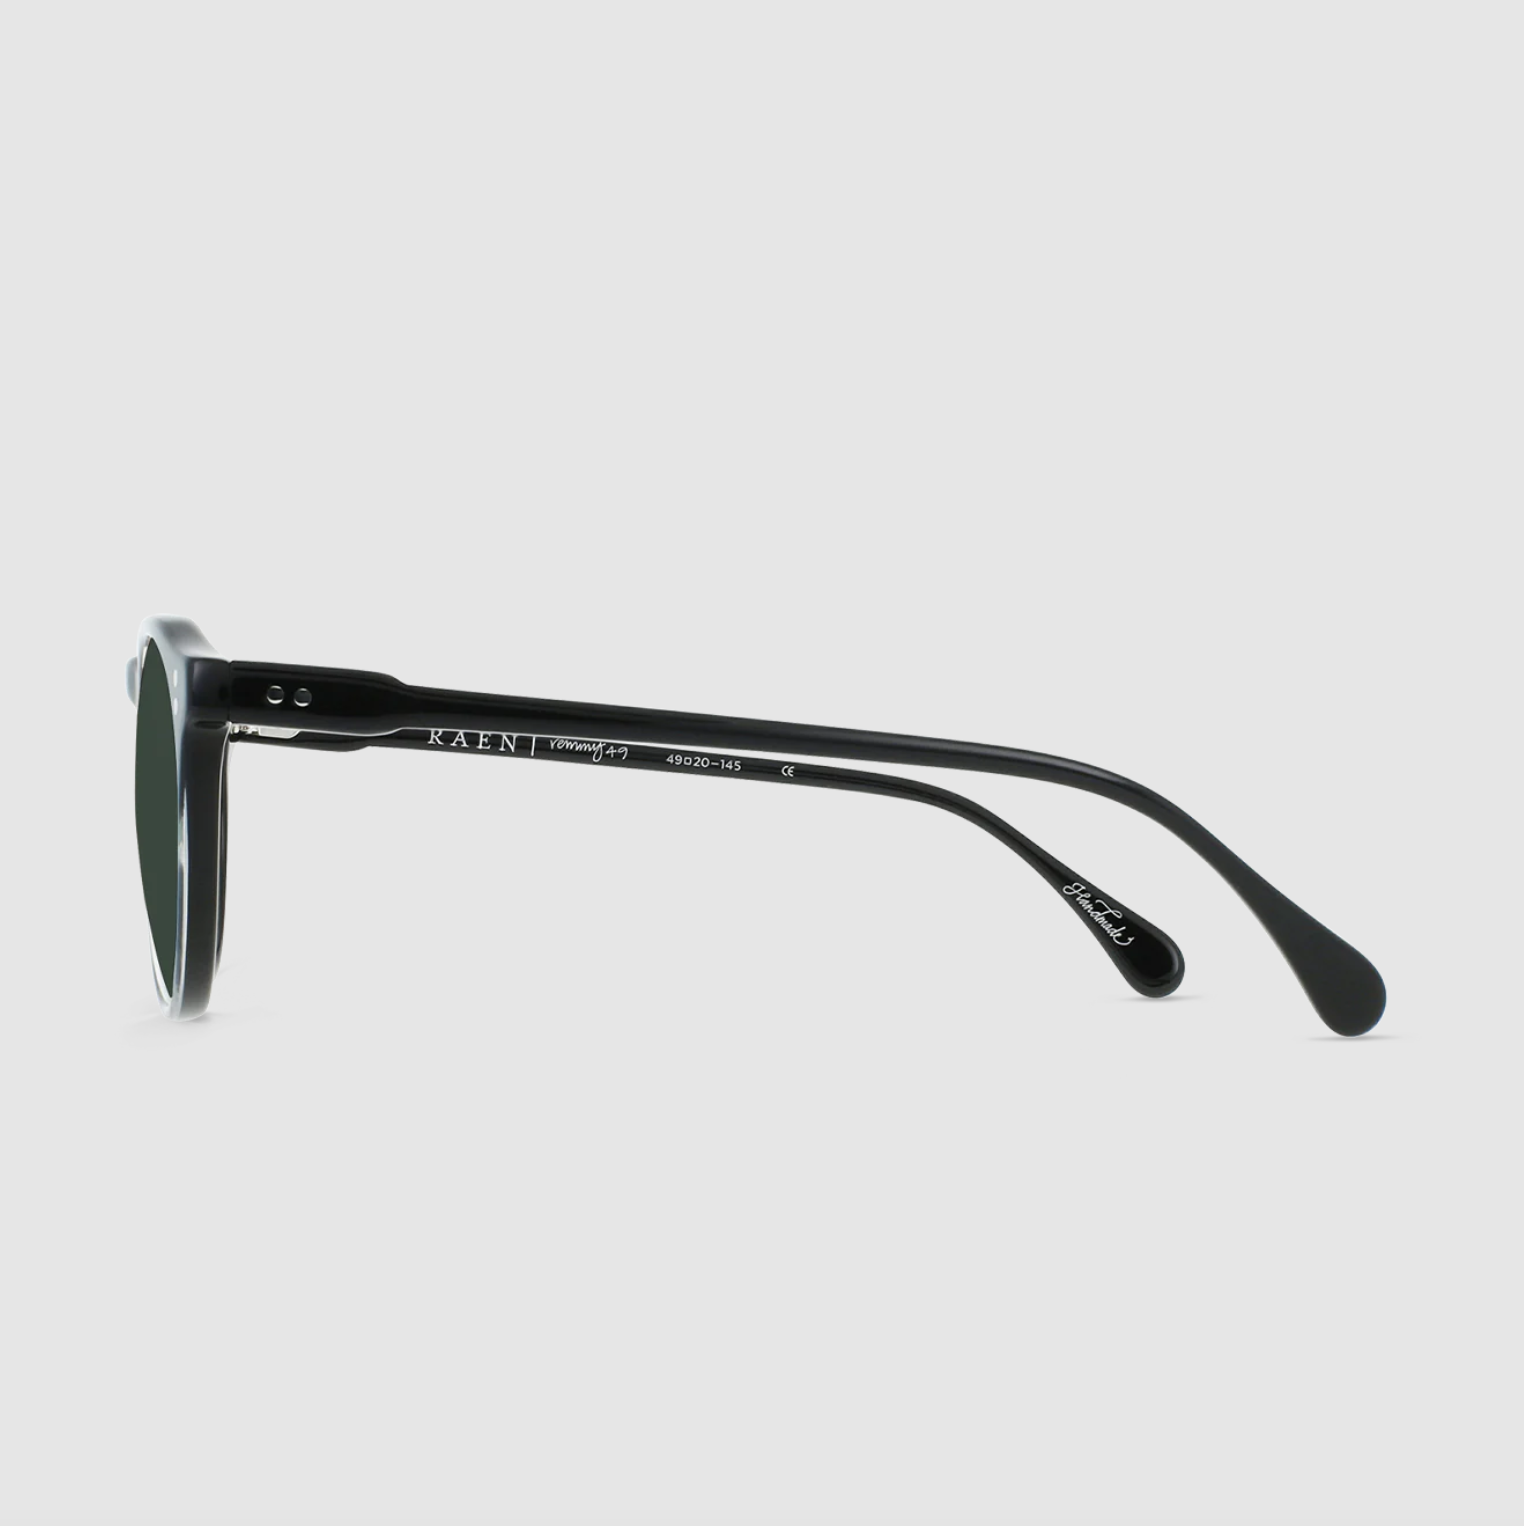 Raen - Remmy 49 Sunglases - Recycled Black / Green Polarized